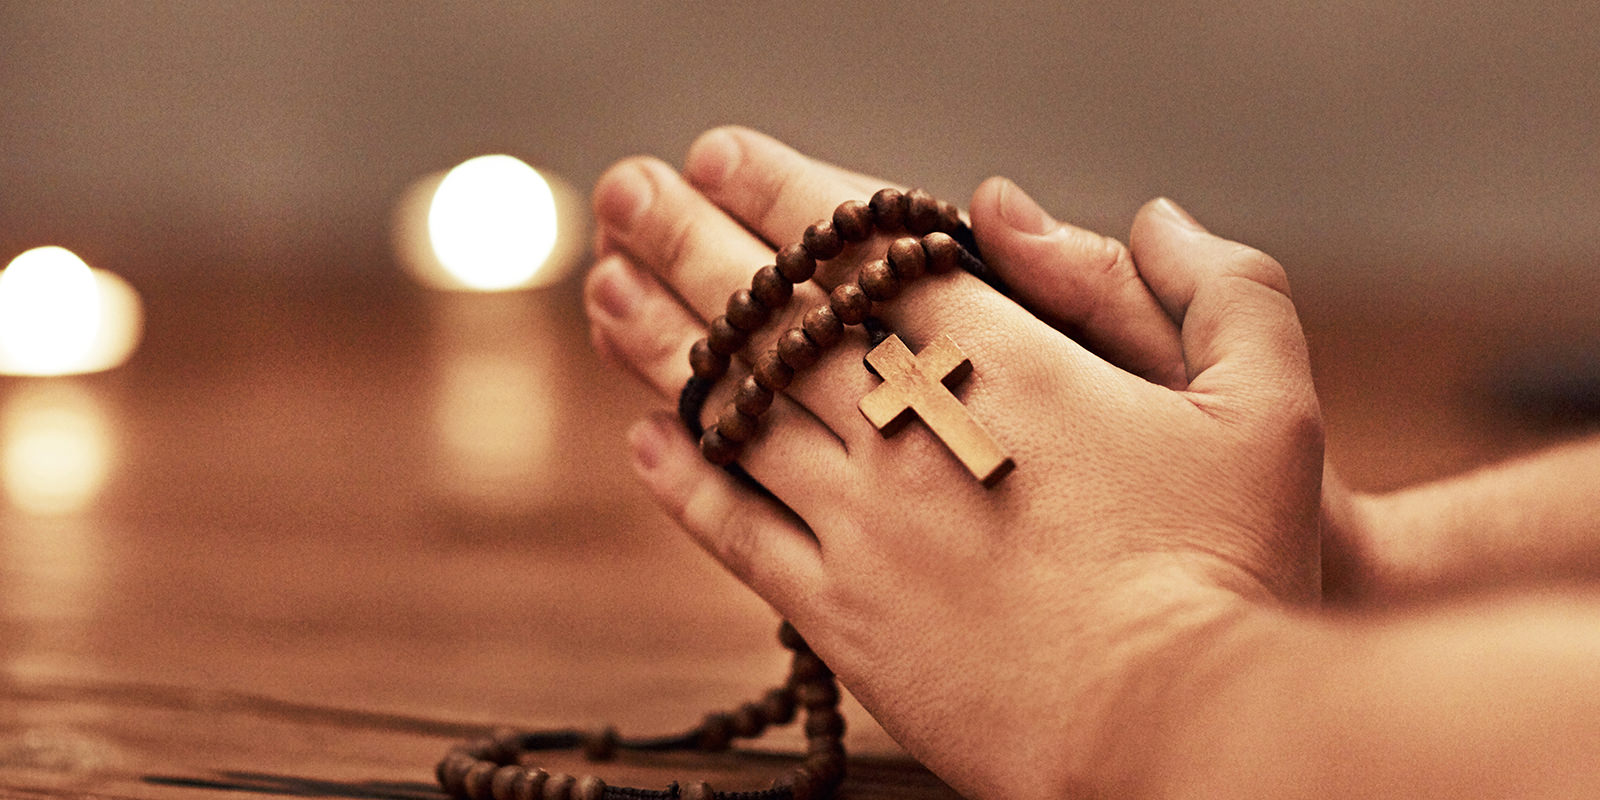 Hands in prayer with rosary